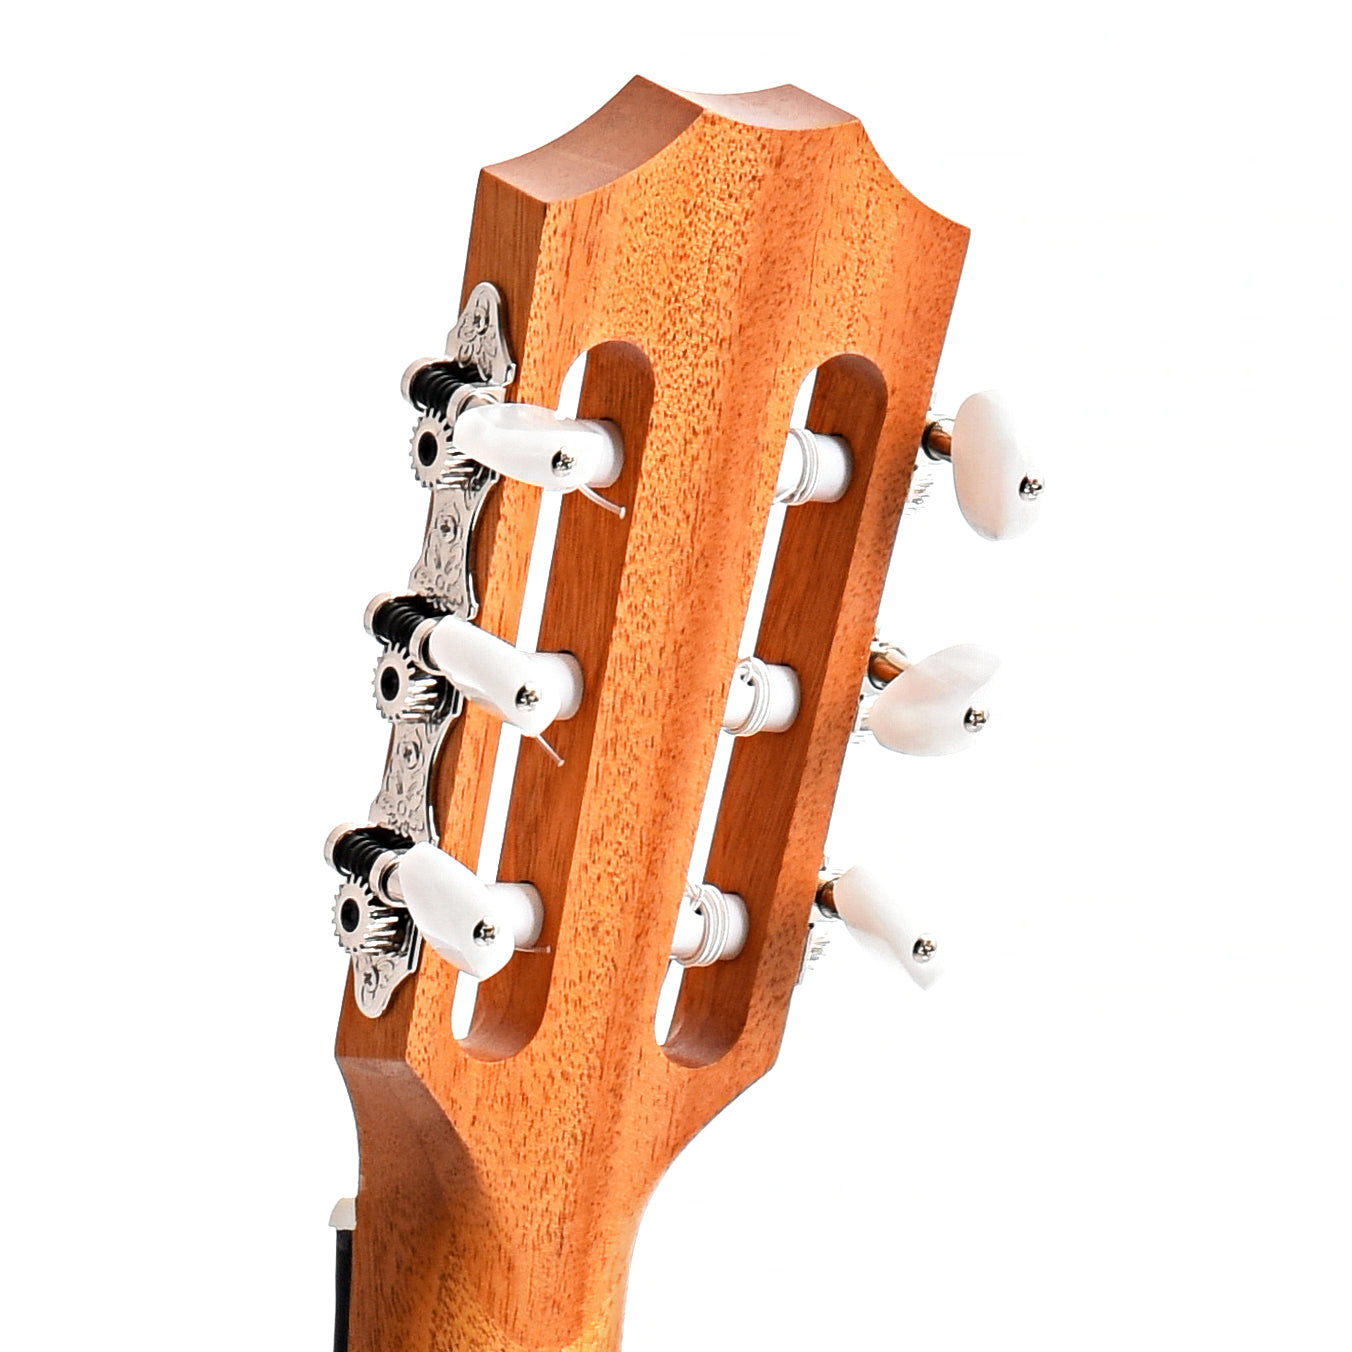 Back headstock of Taylor Academy 12e-N Nylon String Acoustic